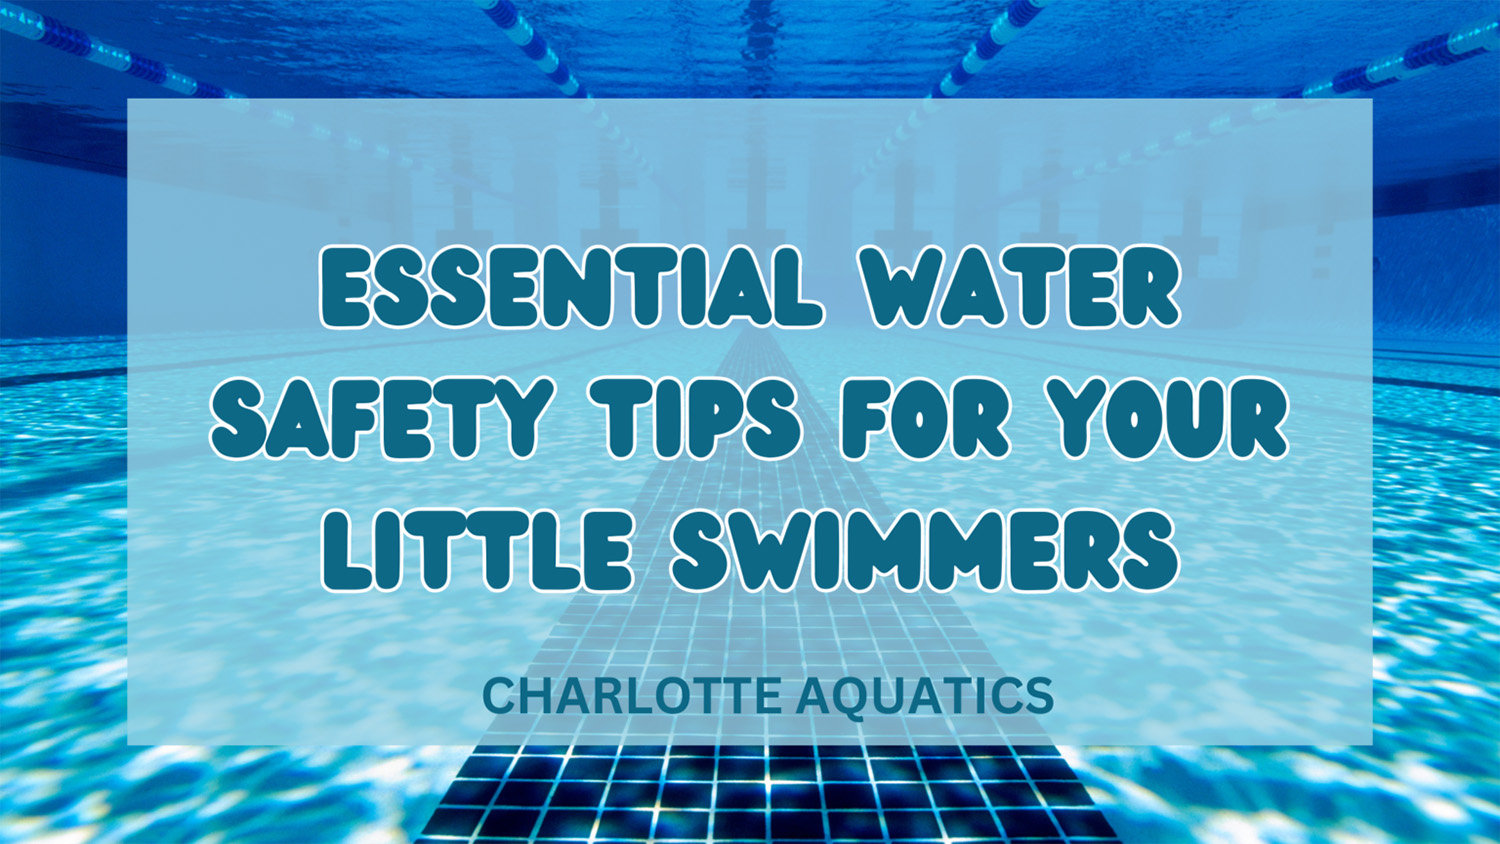 Featured image for “Essential Water Safety Tips for Your Little Swimmers”